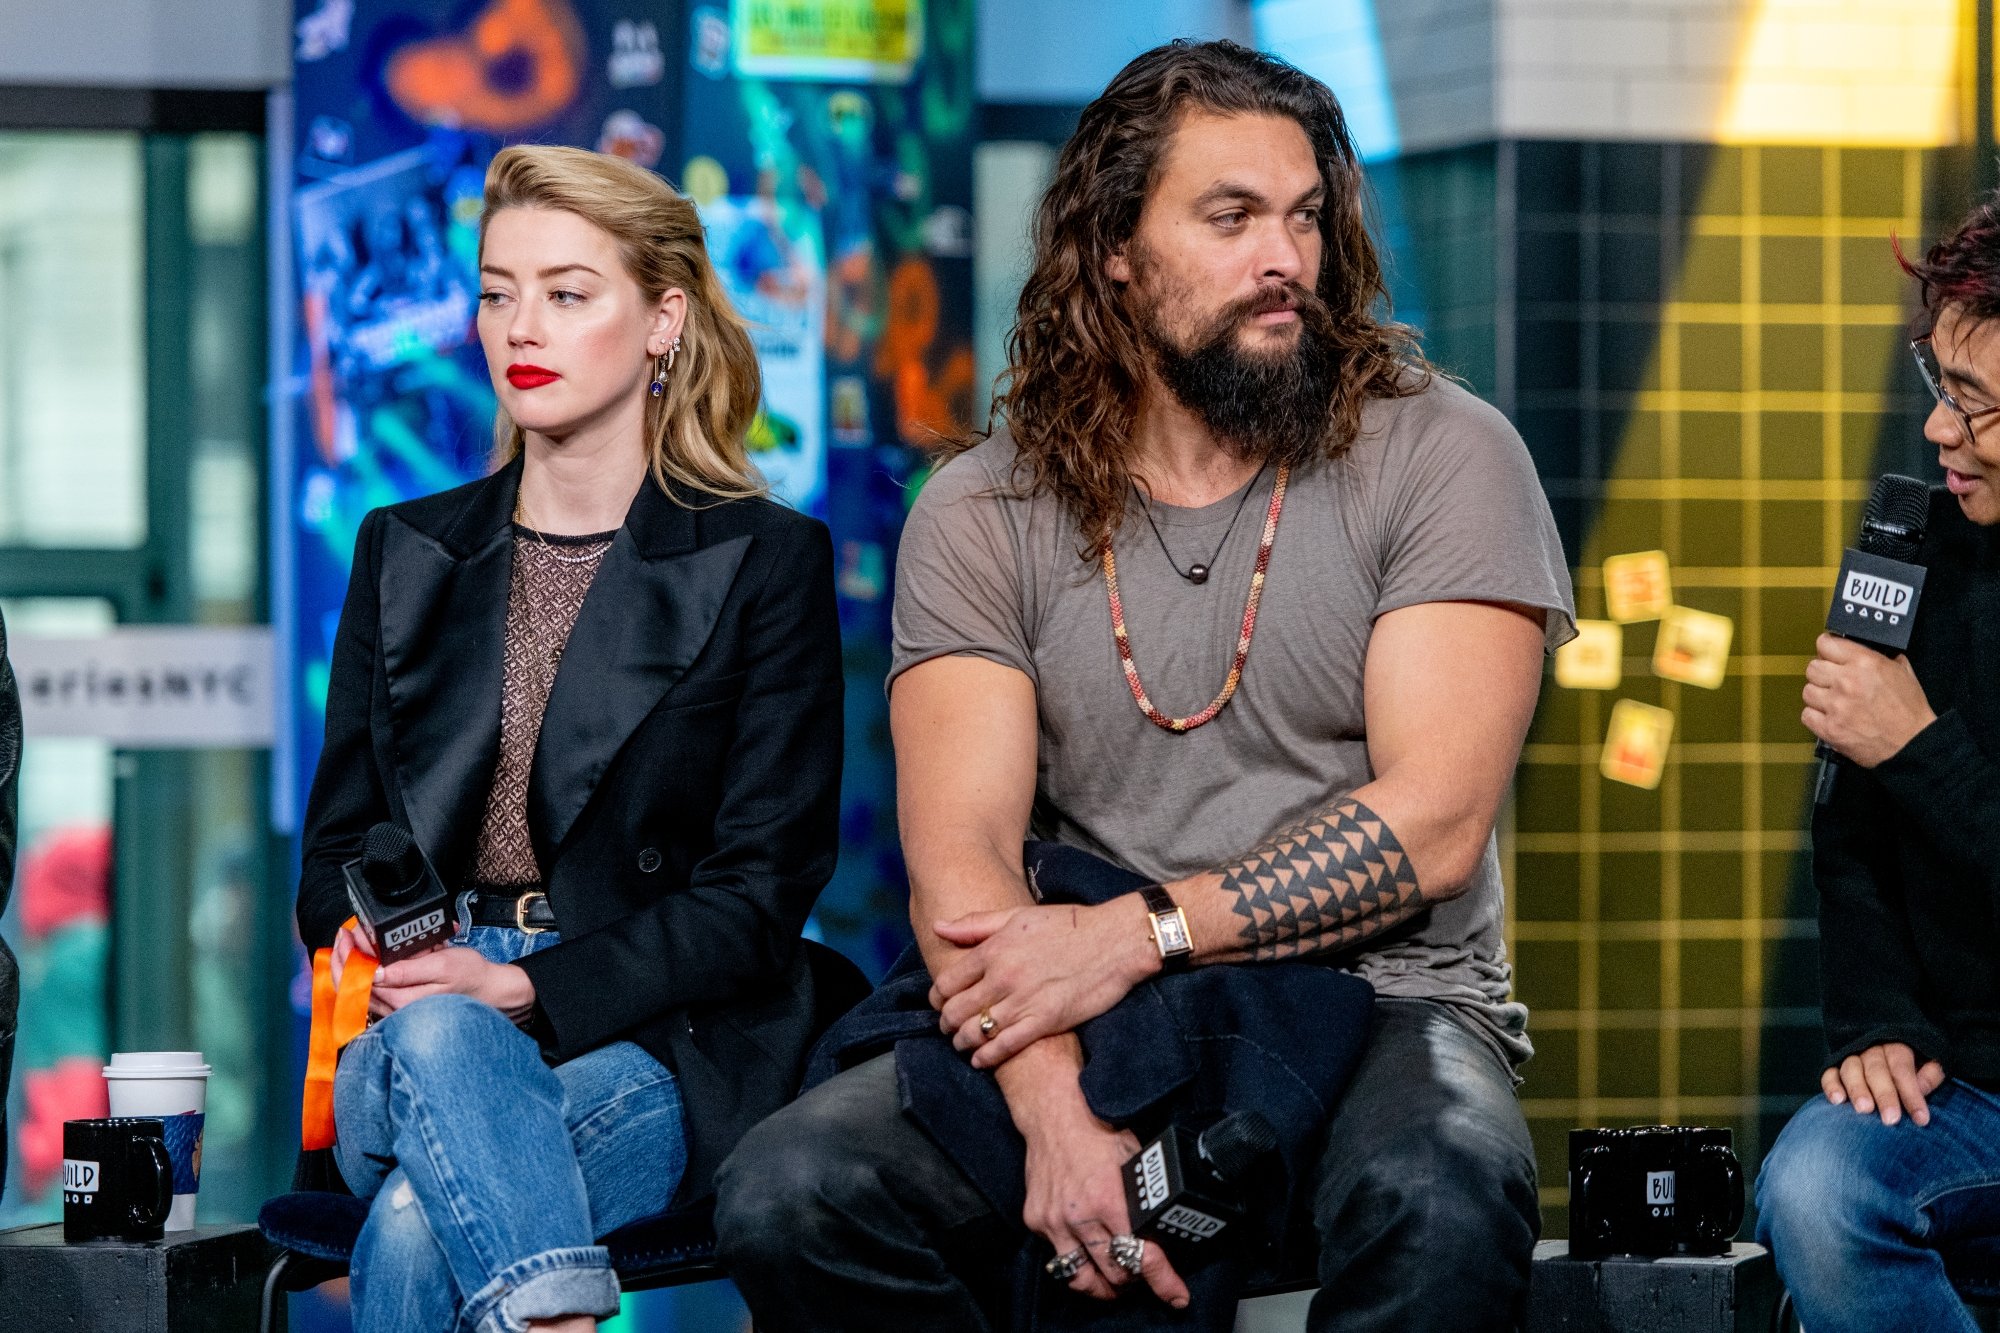 'Aquaman' Amber Heard and Jason Momoa sit holding microphones looking in opposite directions sitting next to each other